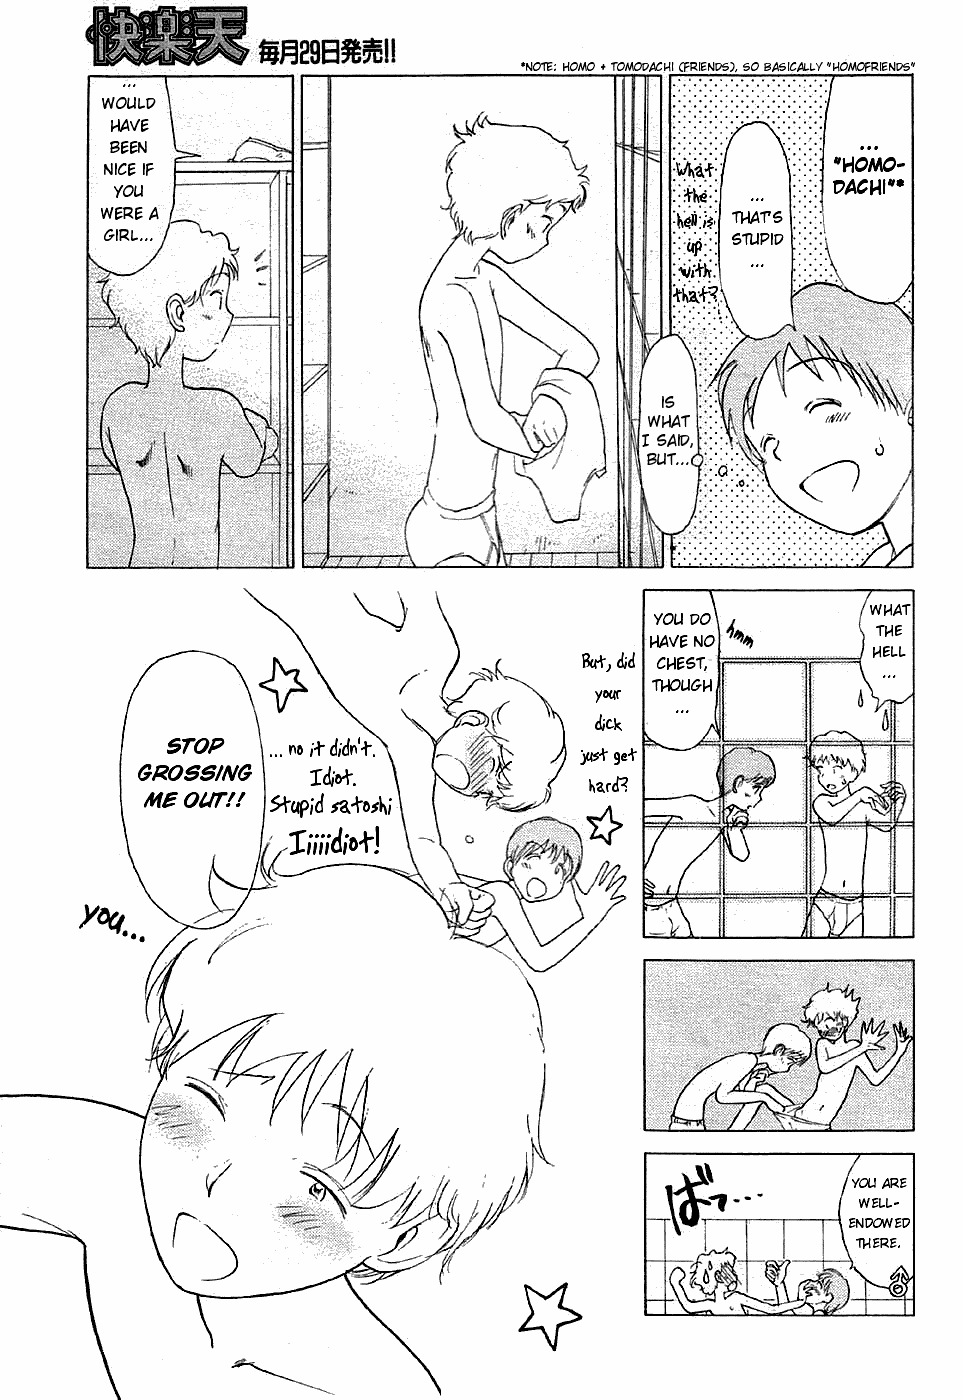 [Youkihi] Inner Growth [English] page 7 full